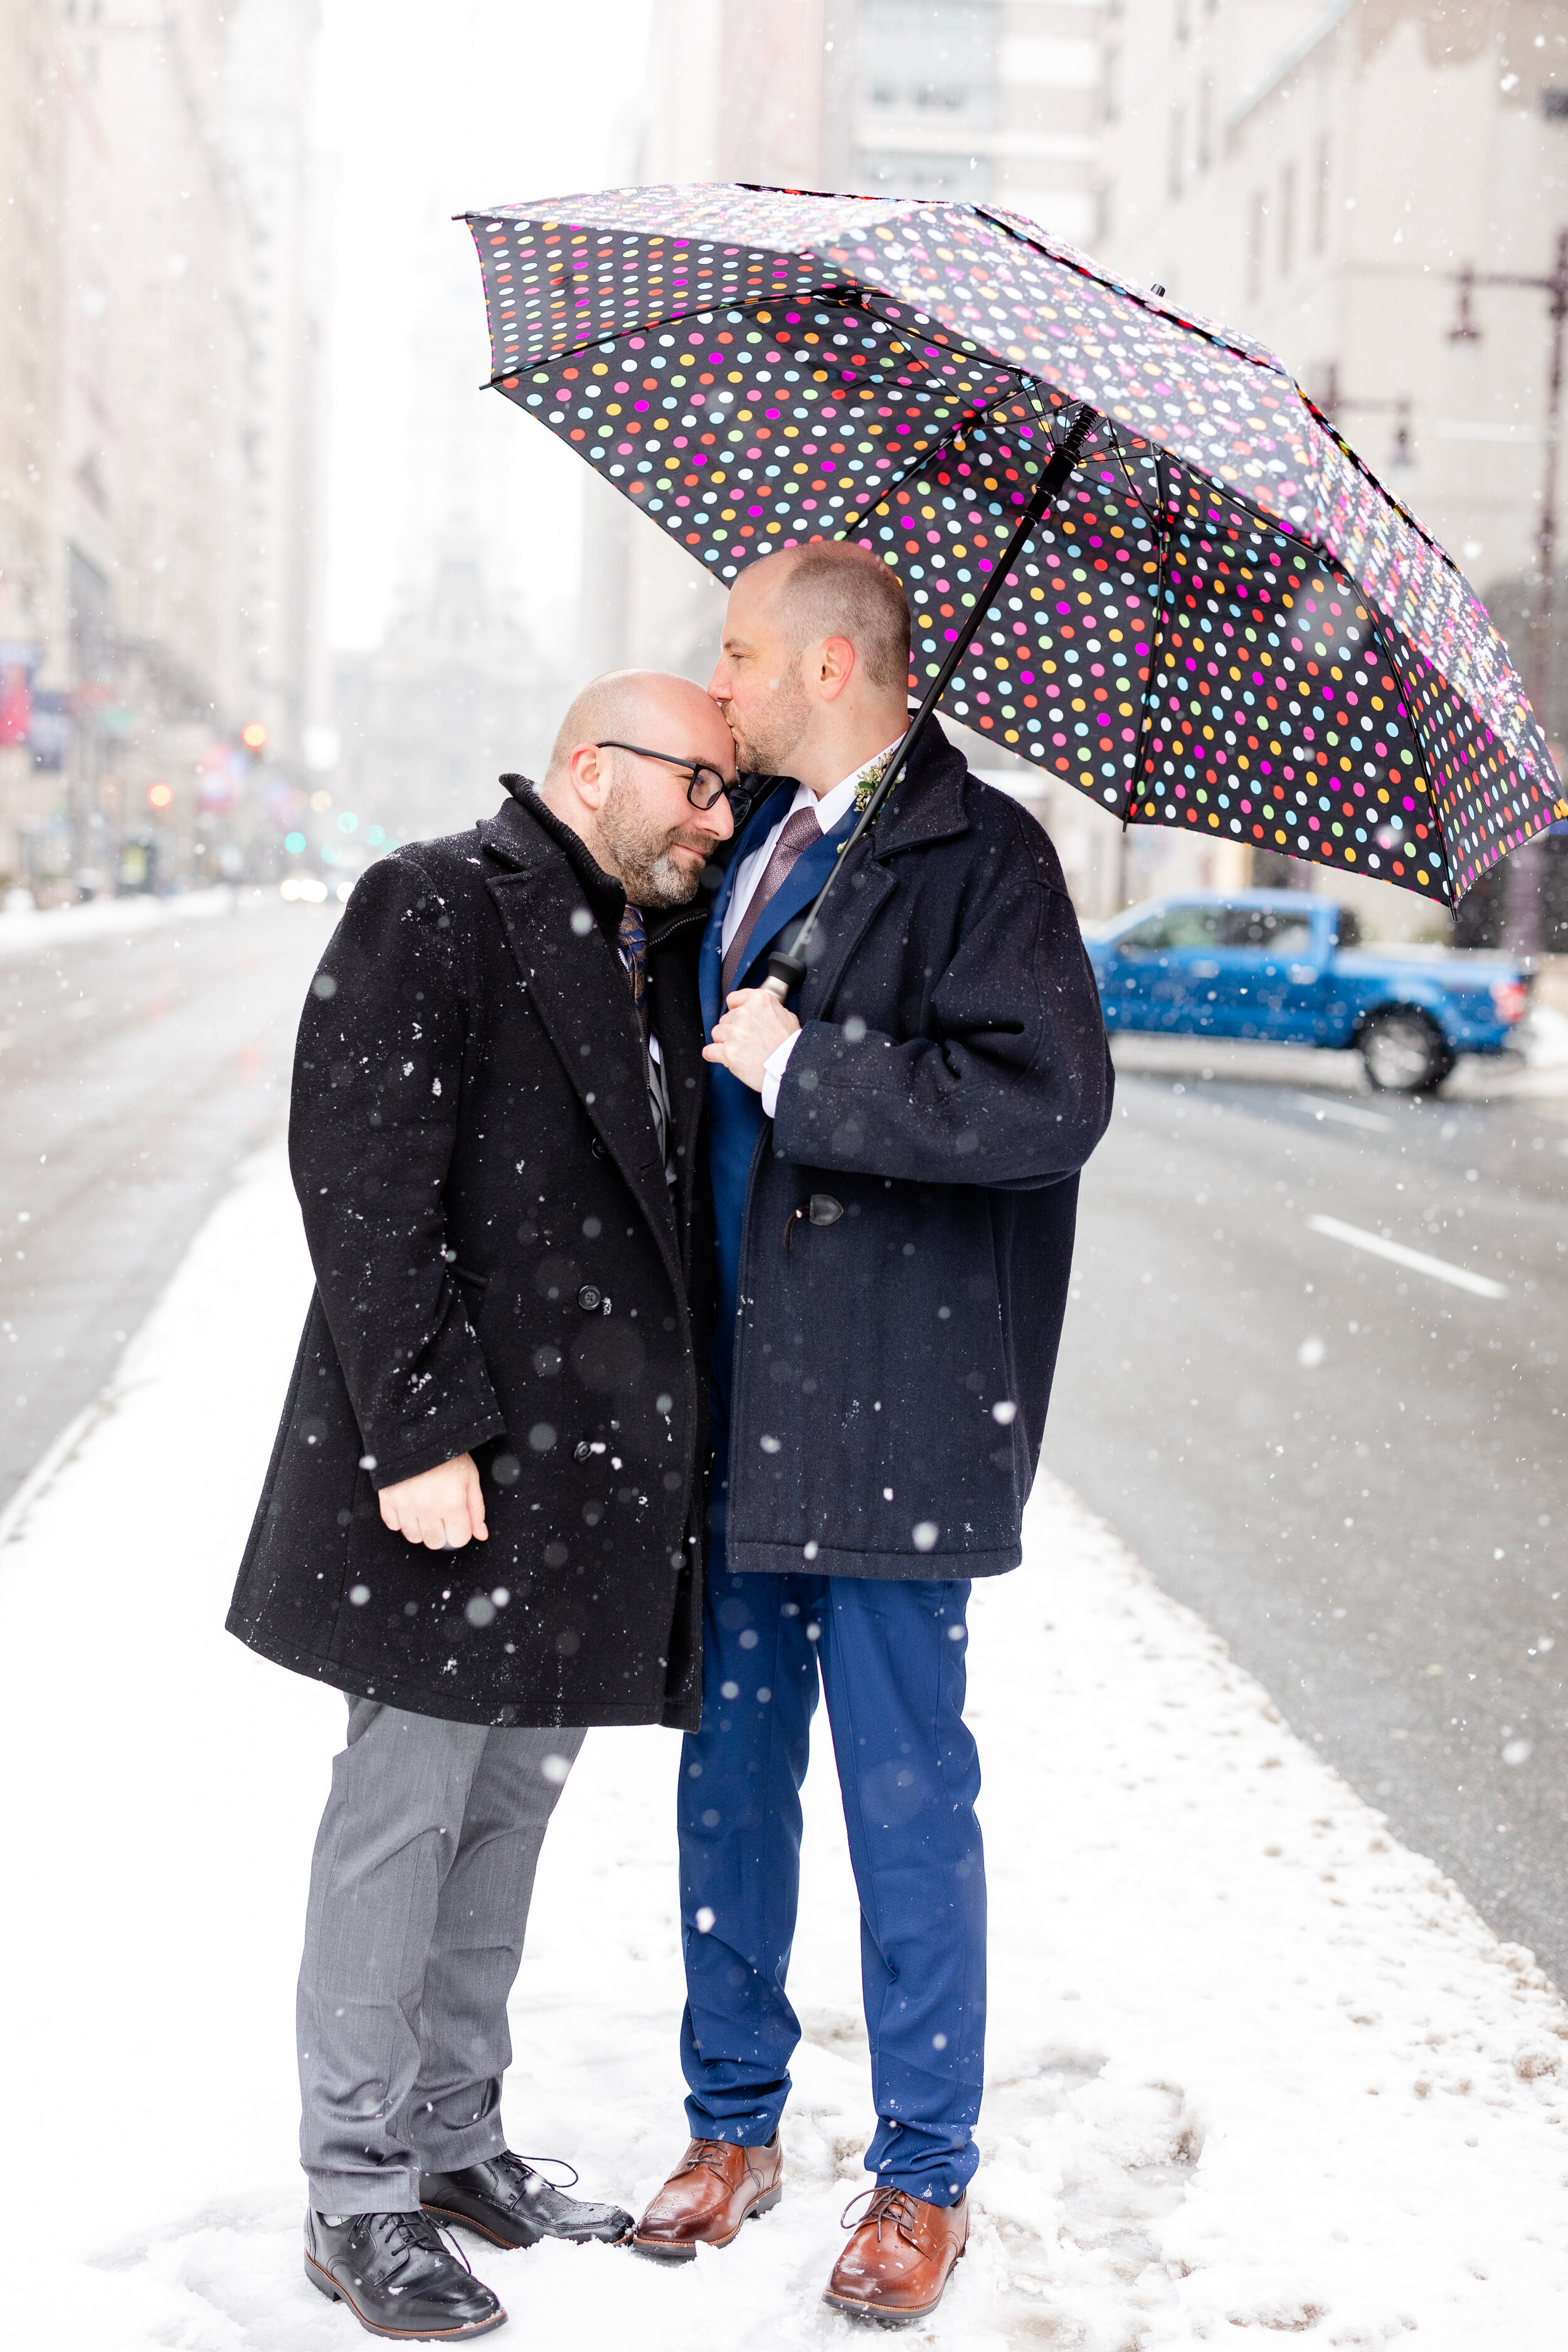 Curtis-and-Bill-Snowy-Vaux-Philly-Elopement-16.jpg